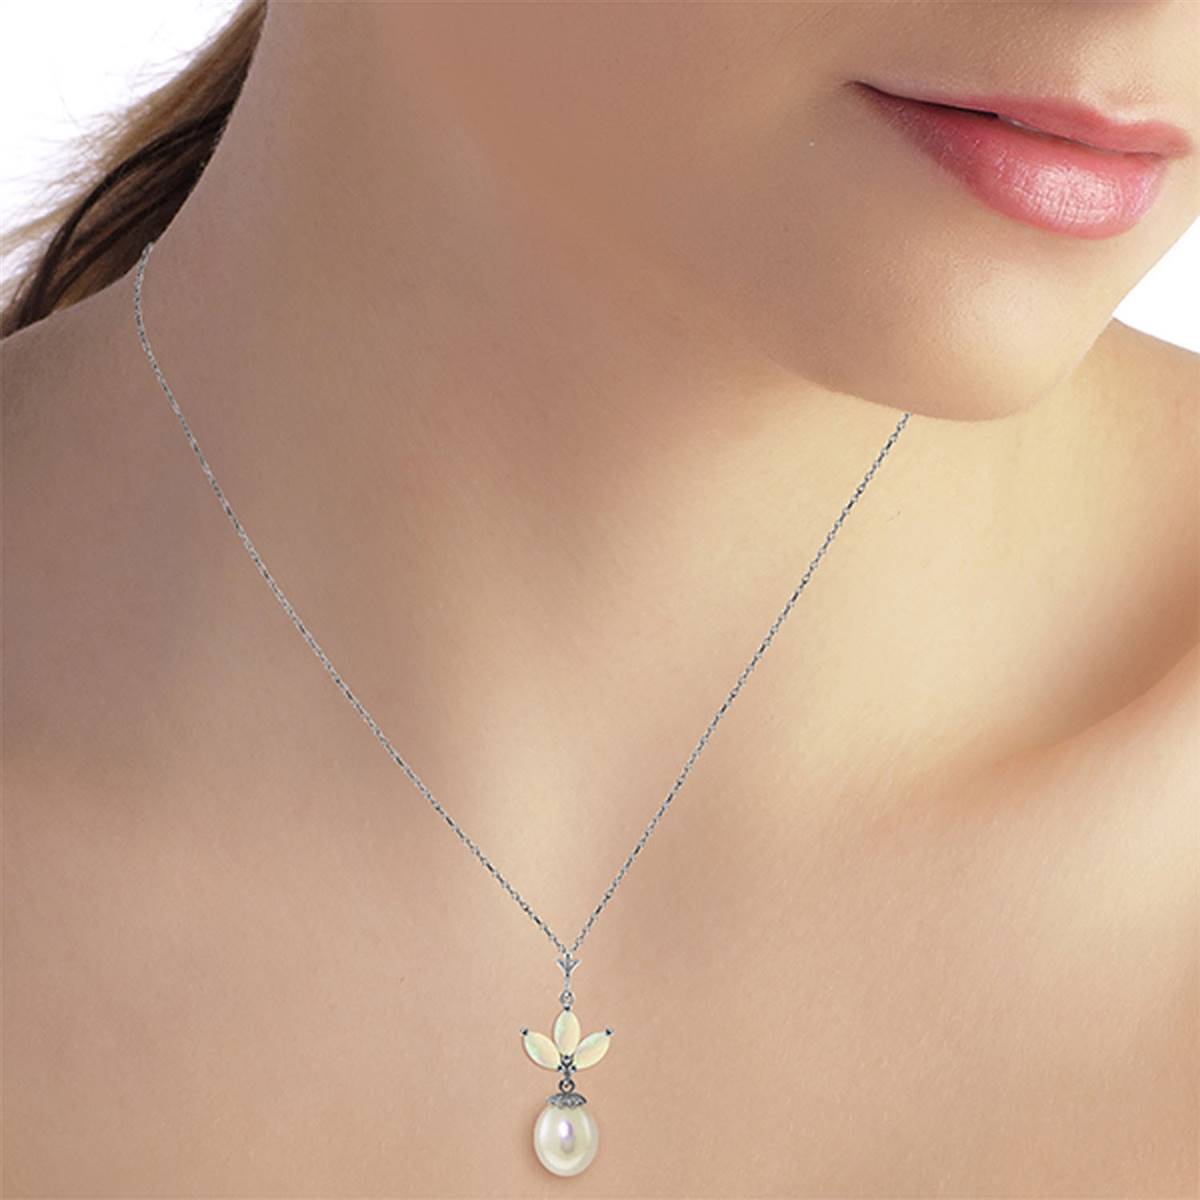 4.75 Carat 14K Solid White Gold Necklace Pearl Opal